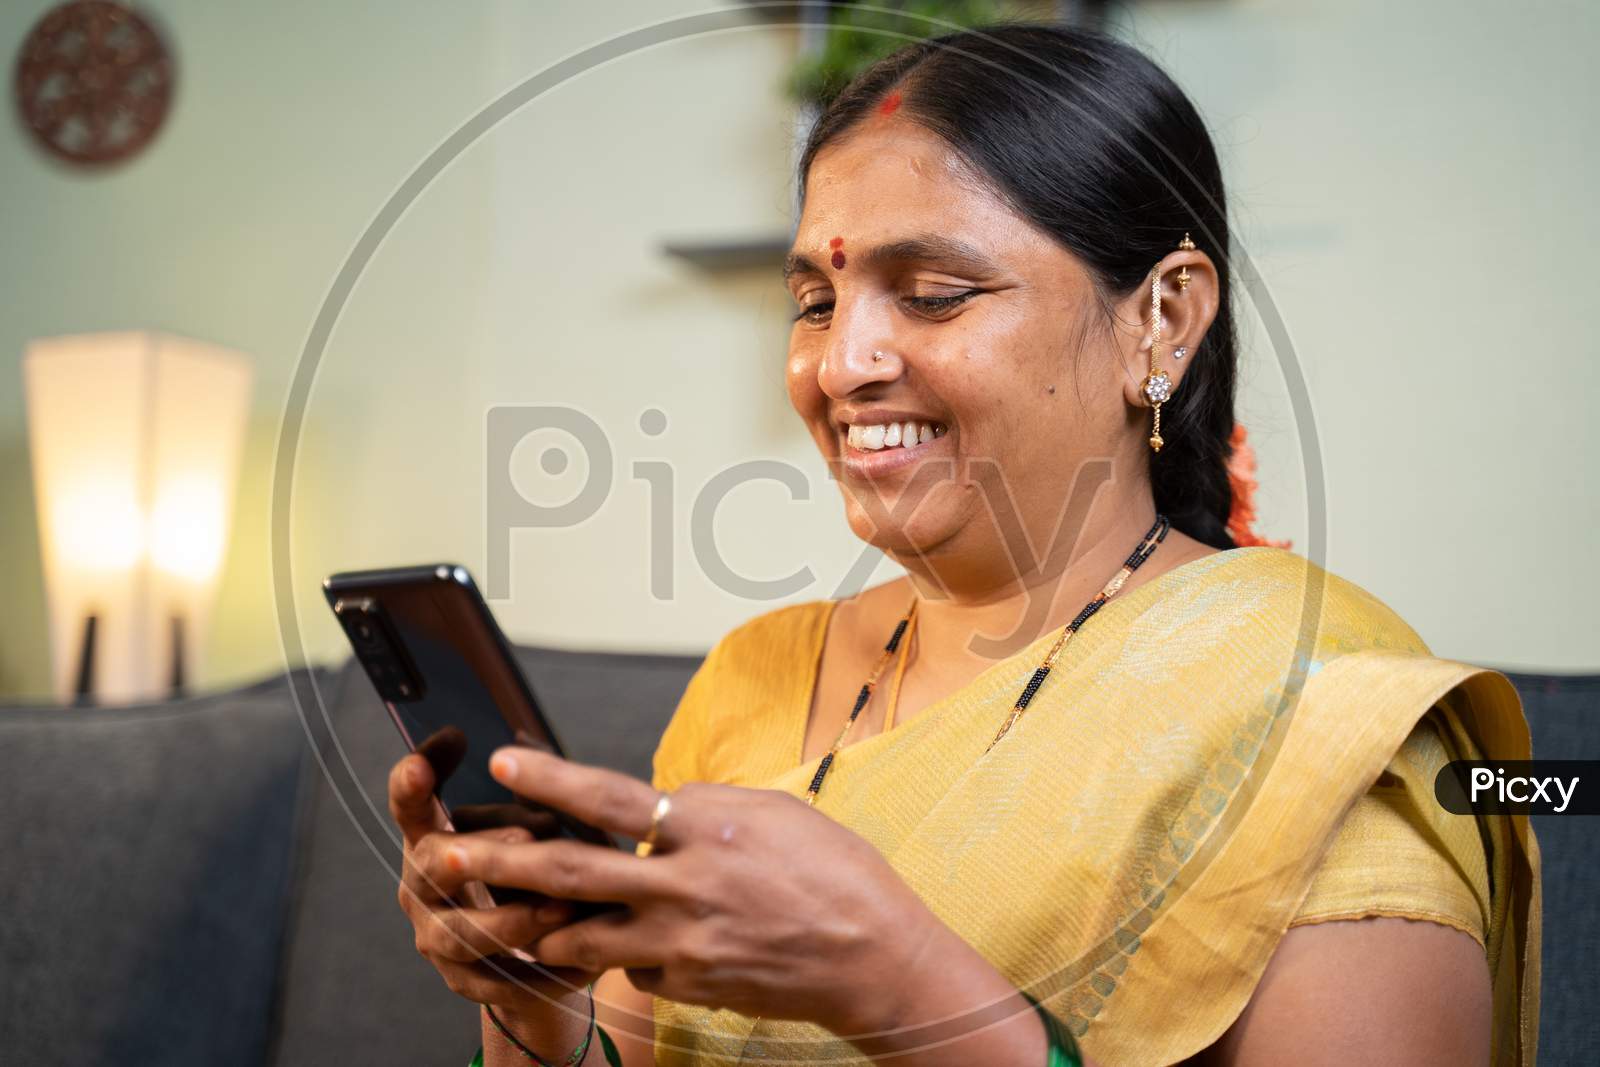 Happy Smiling Indian Woman Busy Using Mobile Phone While Sitting On Sofa - Concept Of People Using Social Media, Online Messaging App, Internet And Entertainment Lifestyle.